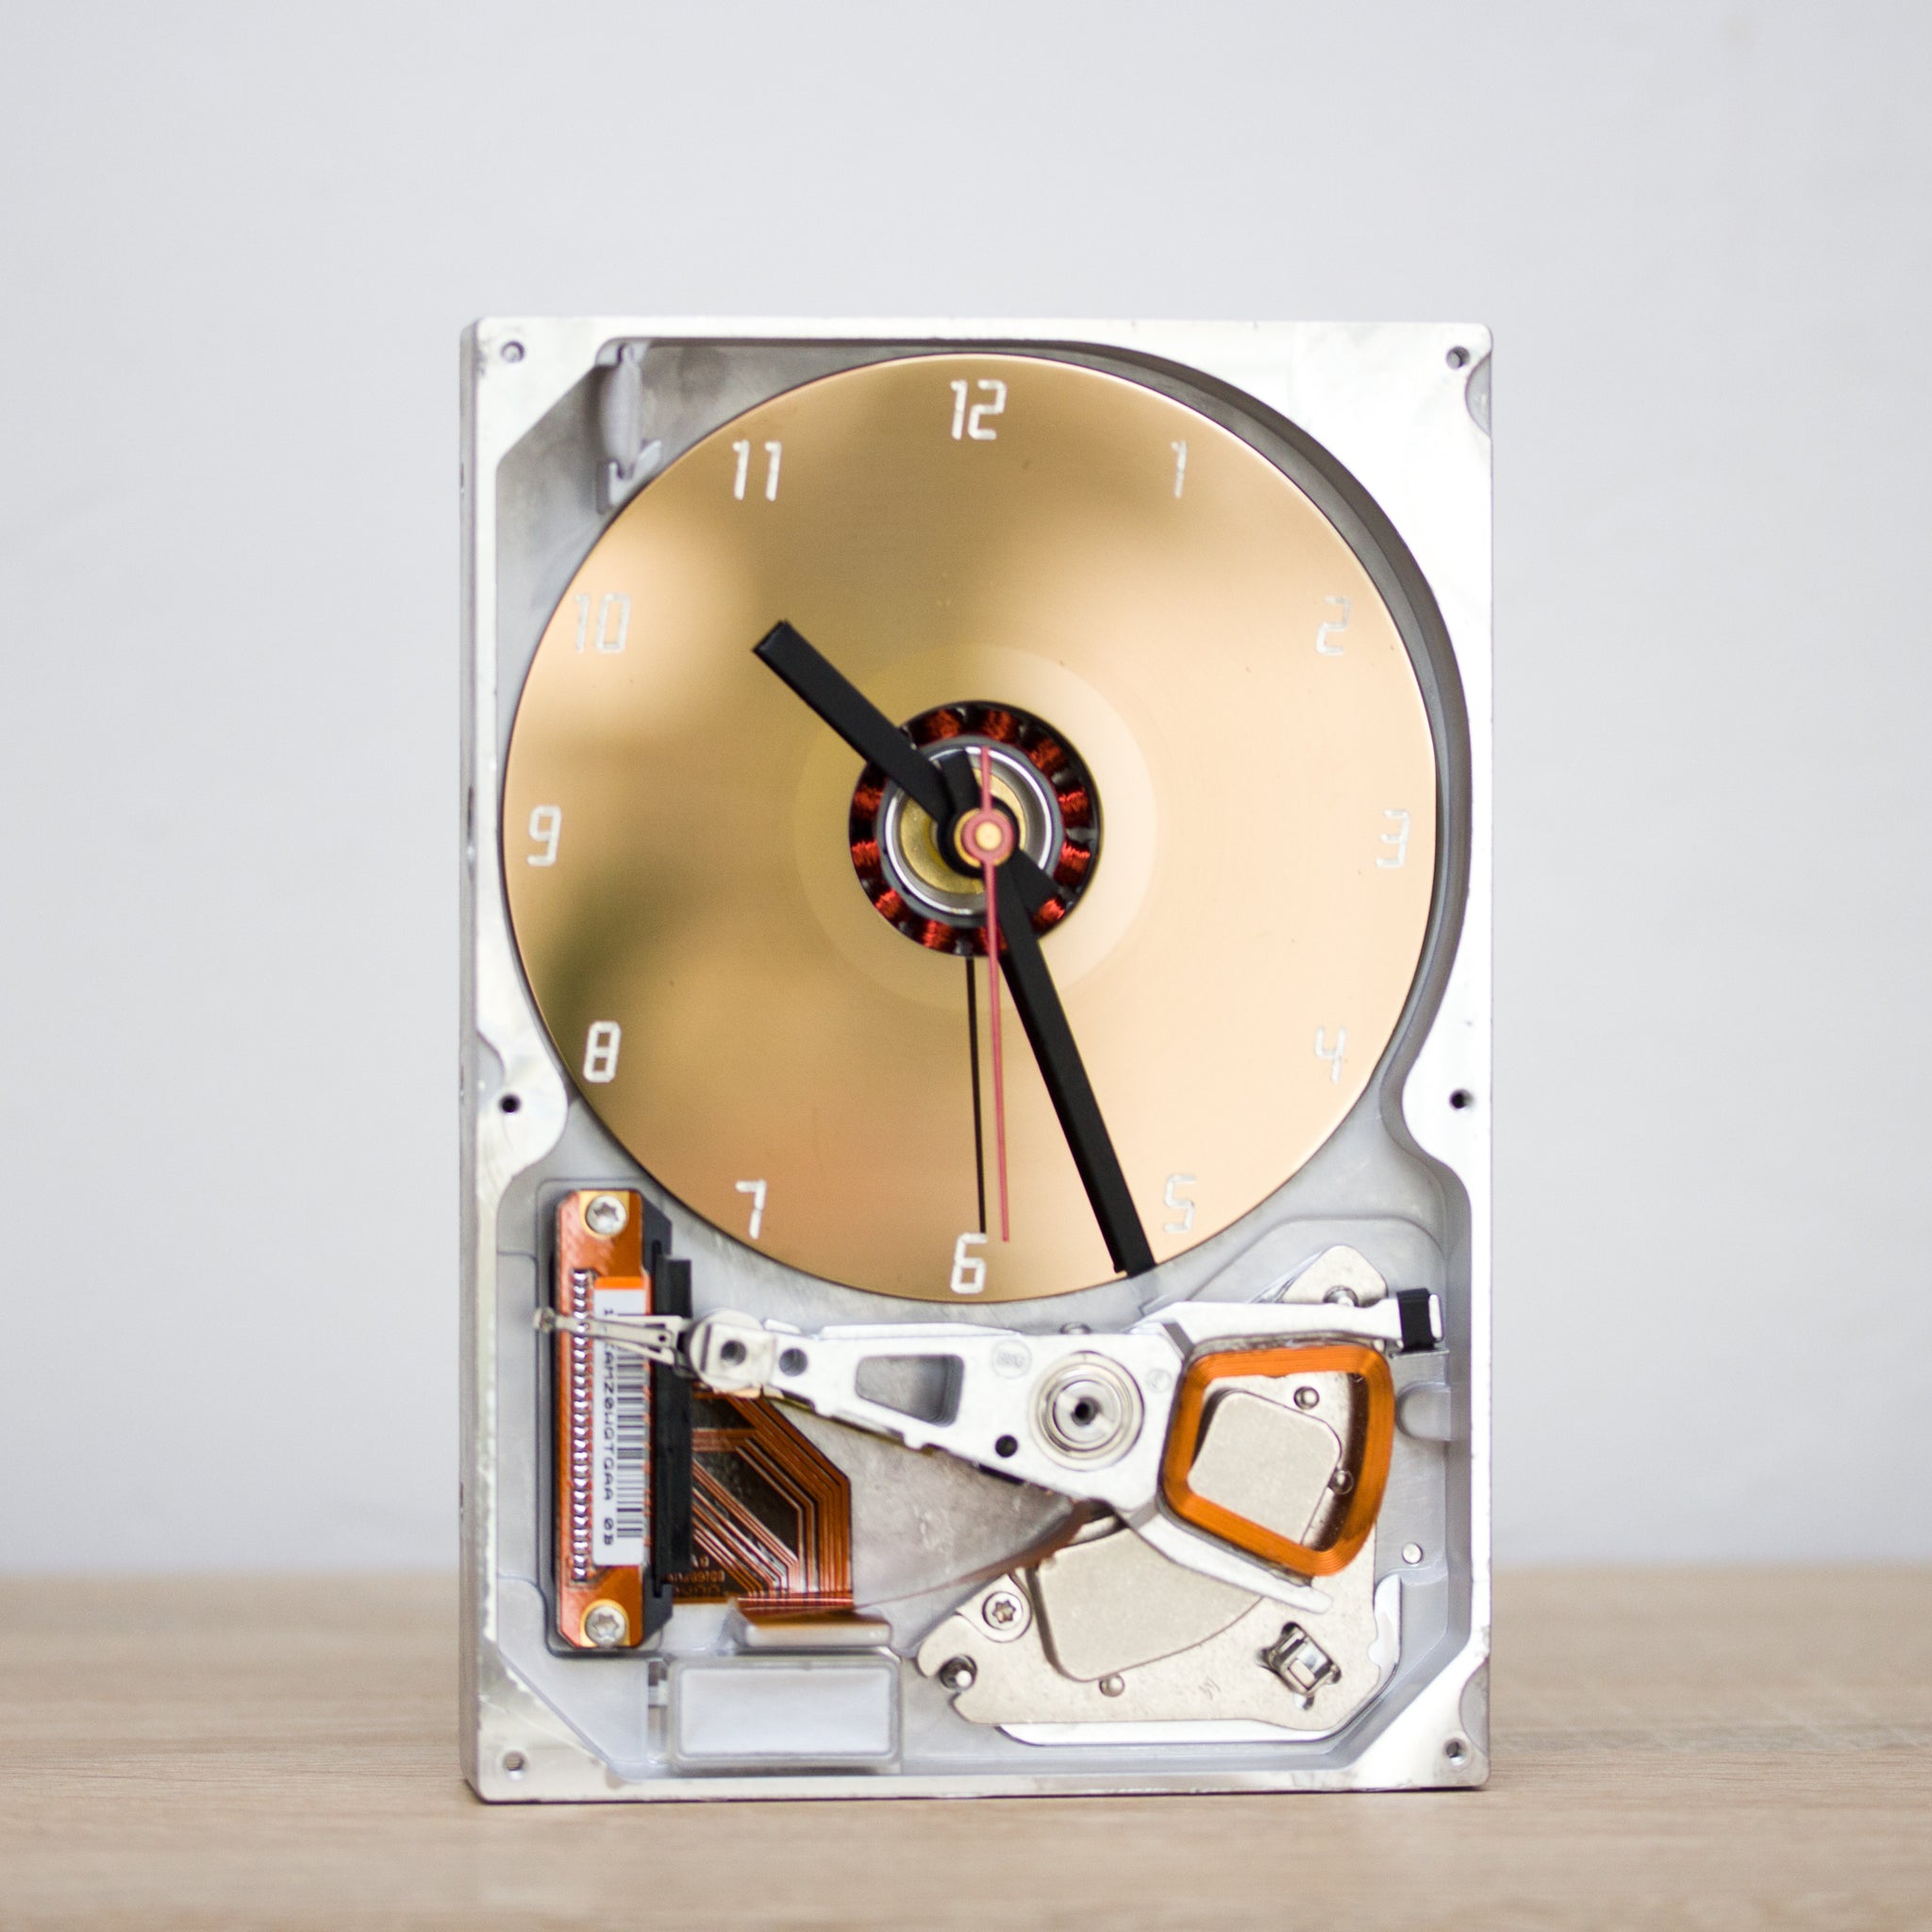 Desk clock made of recycled HDD drive